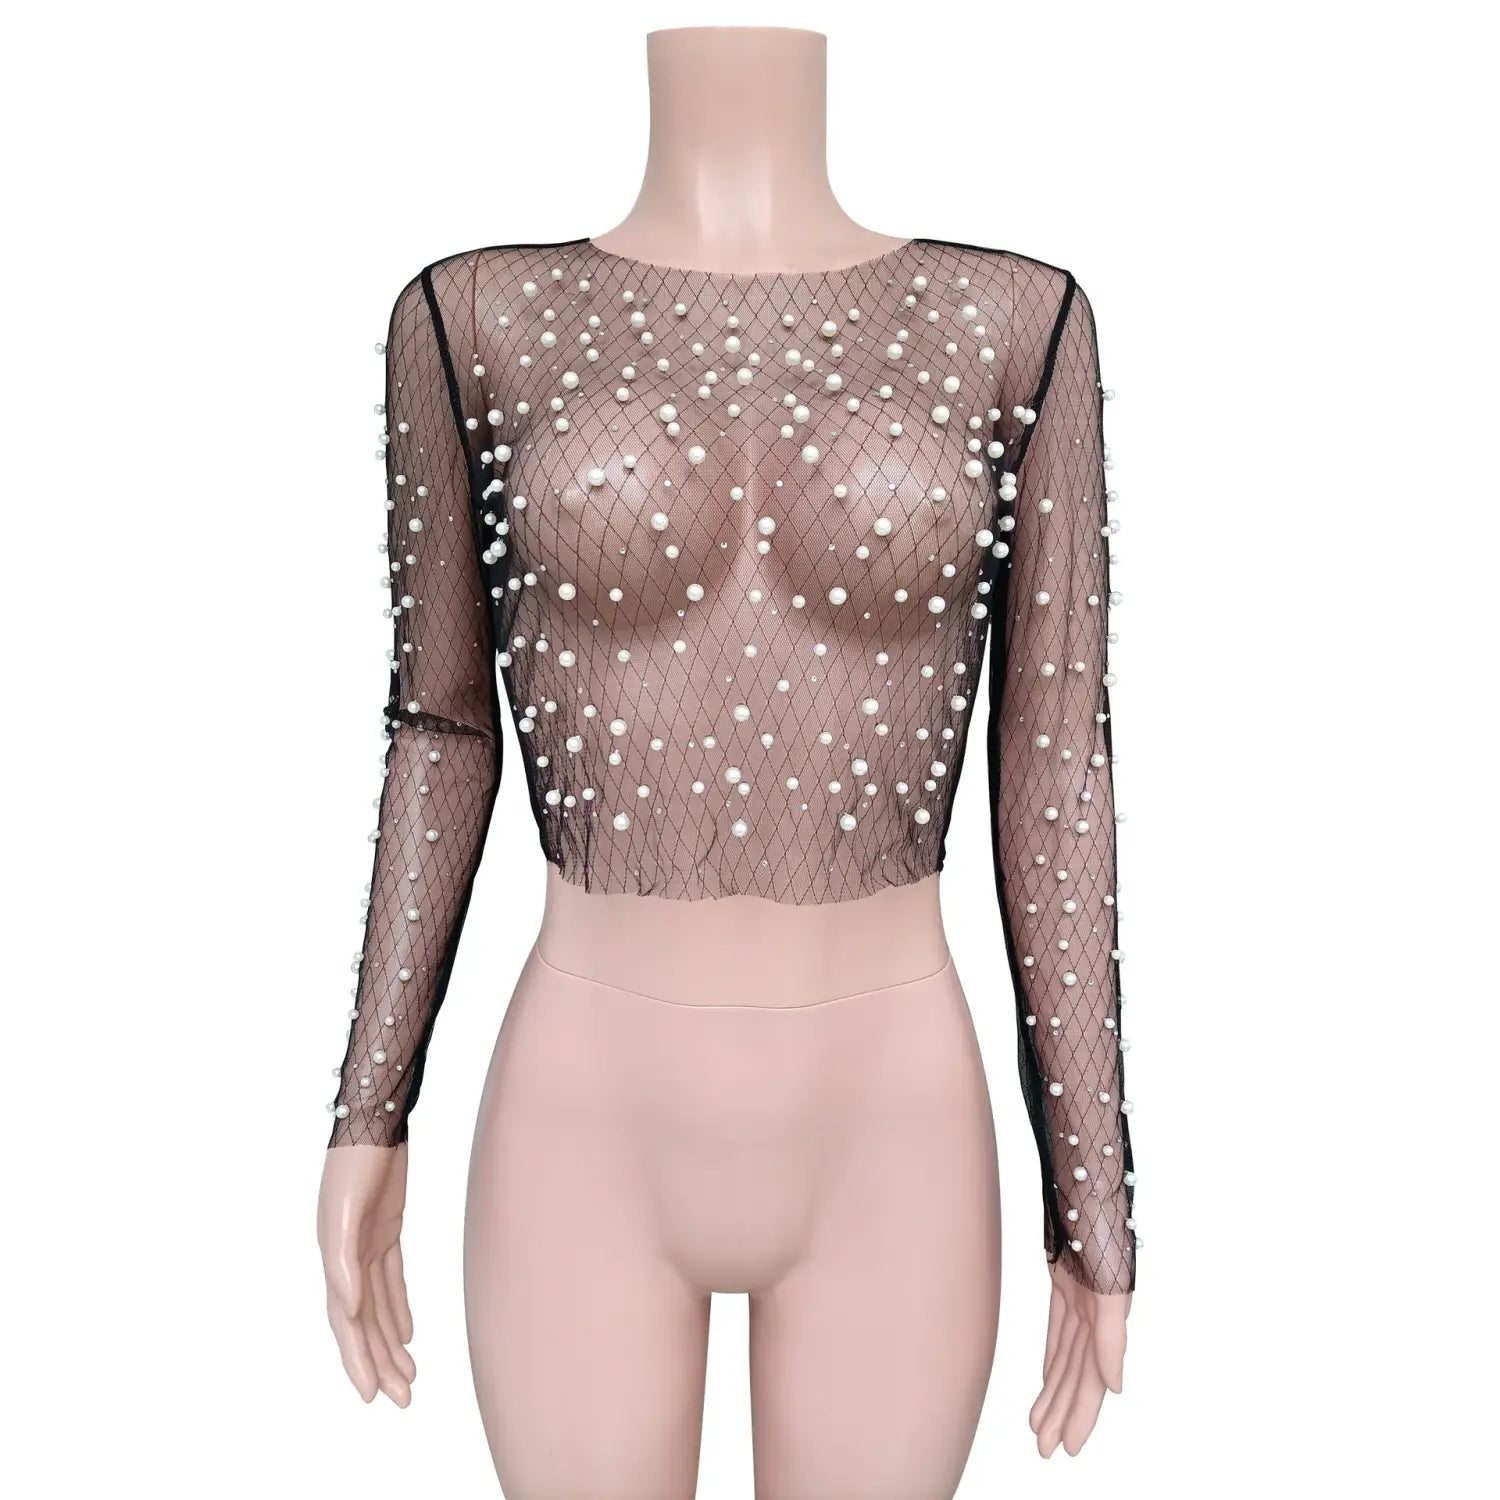 Beaded Crop Top - Mesh Lace & Sequin Glamour